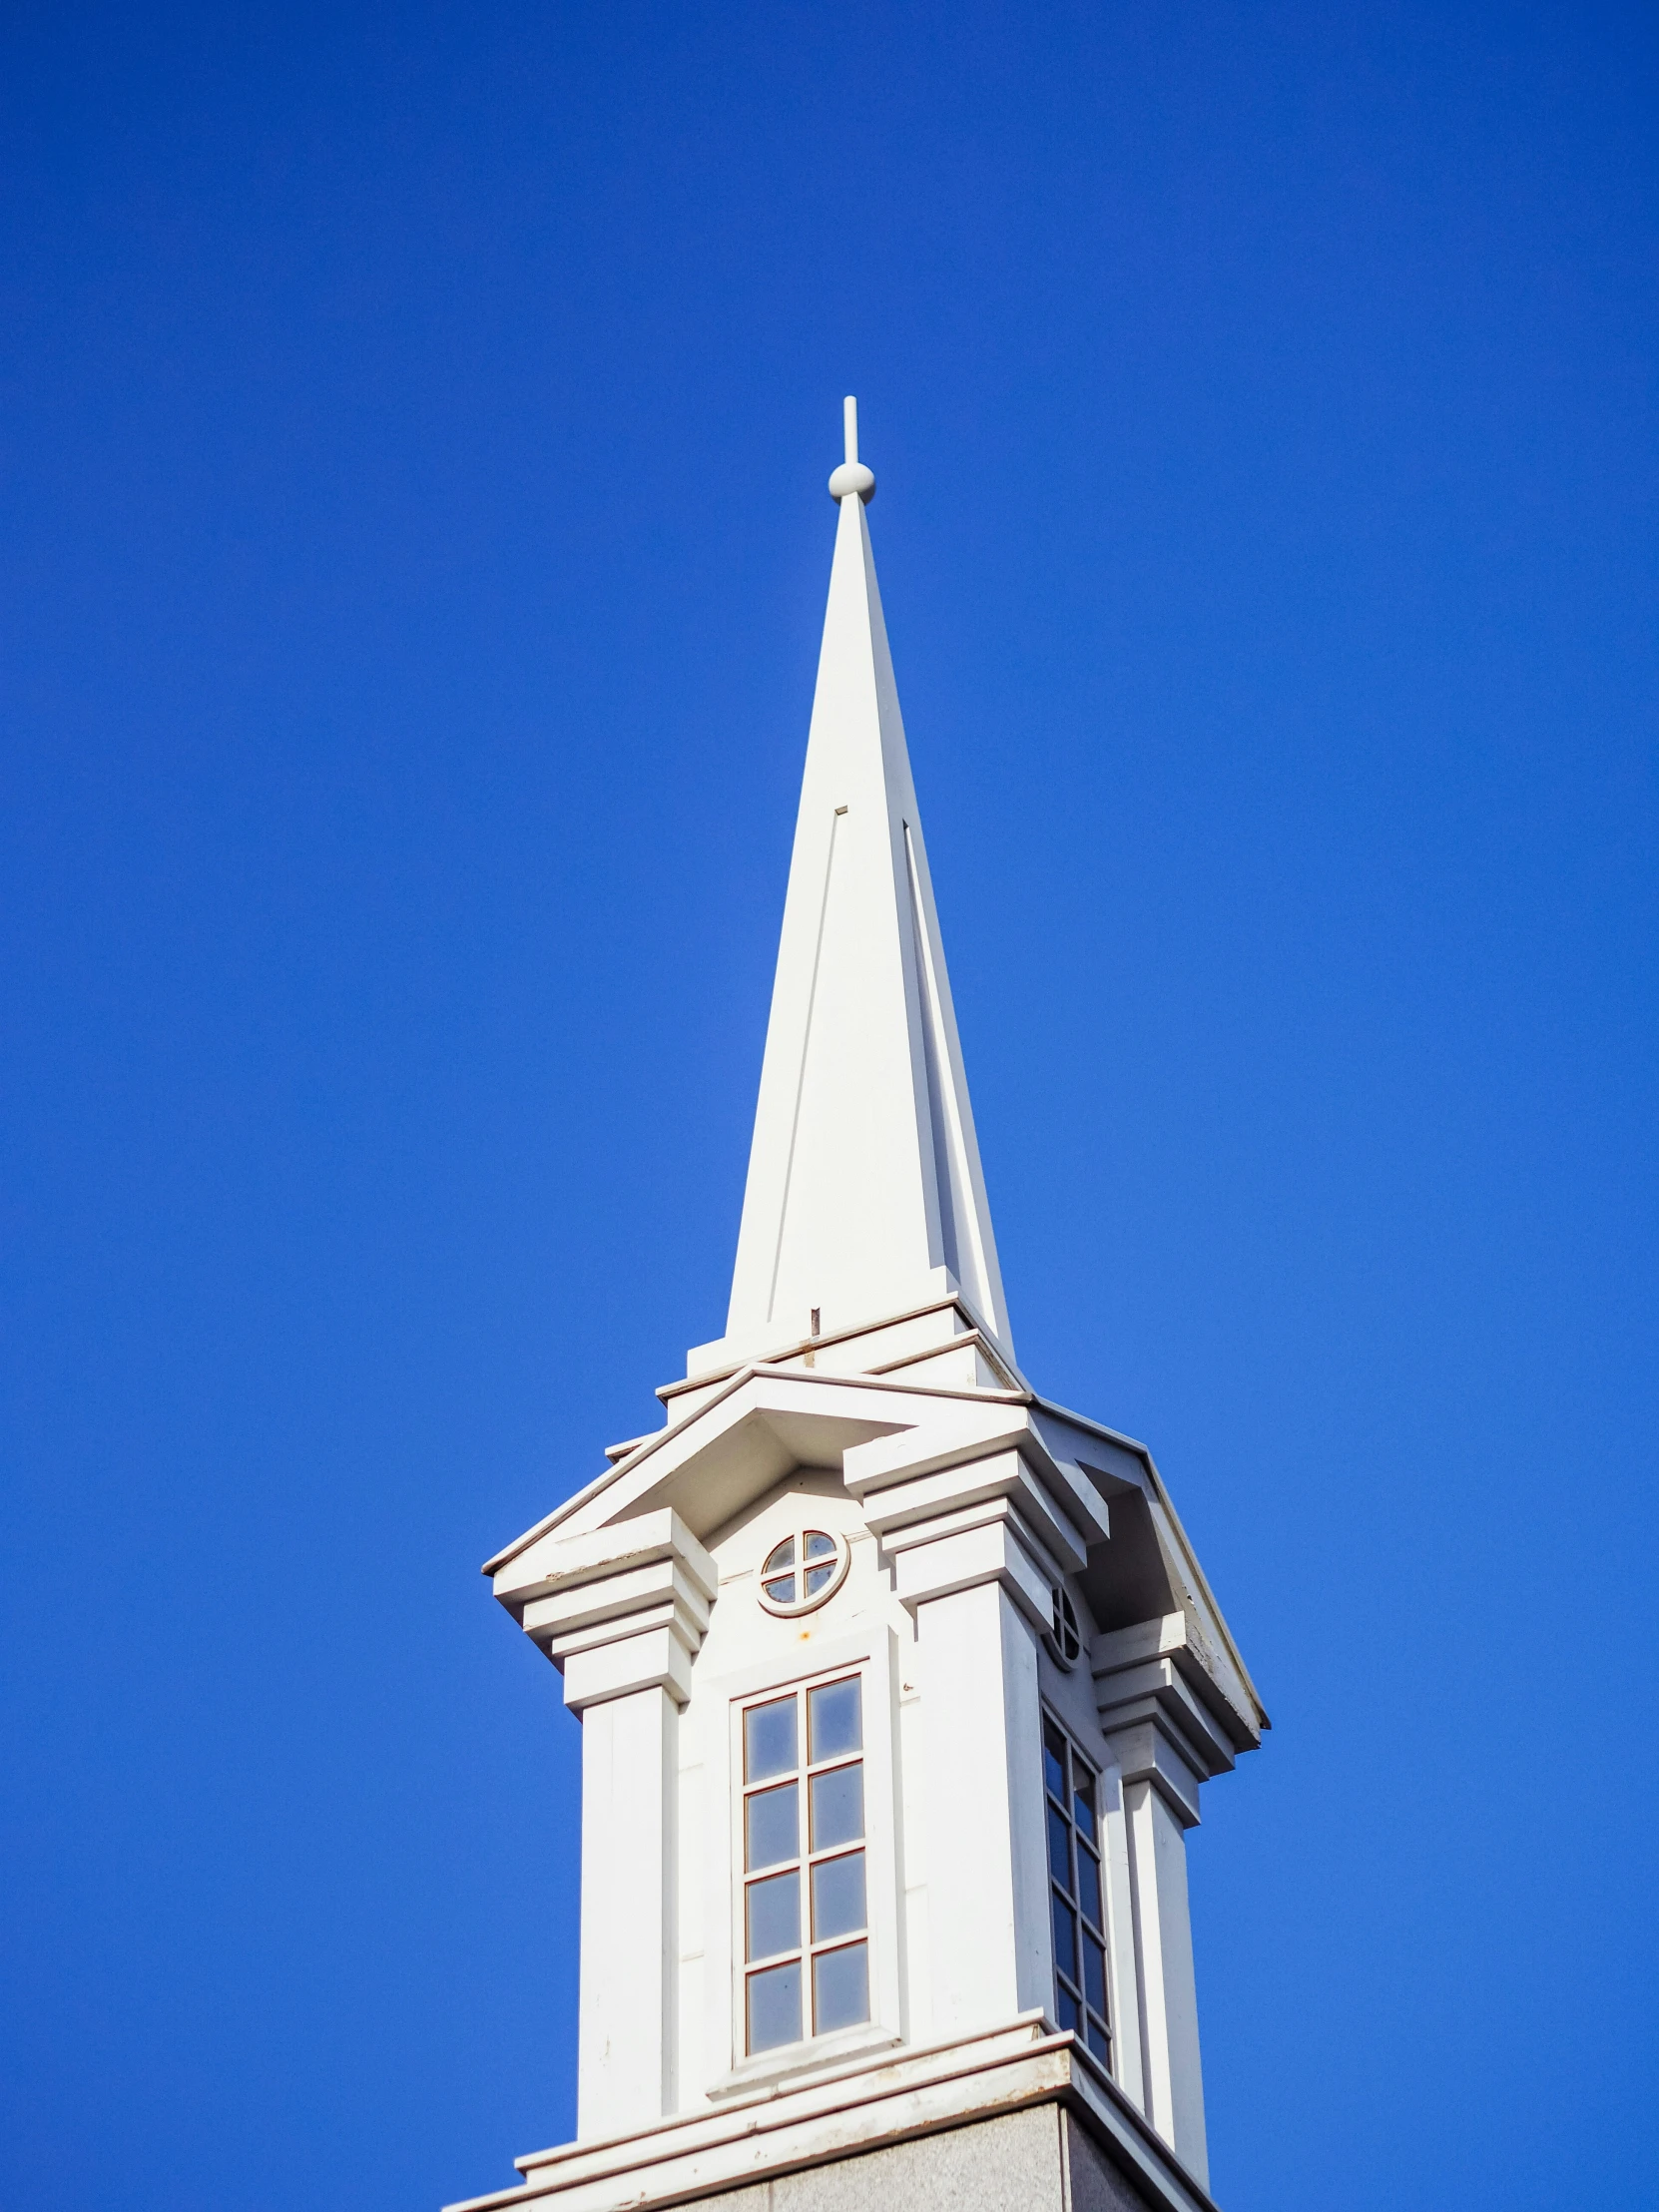 a tall white steeple against a bright blue sky